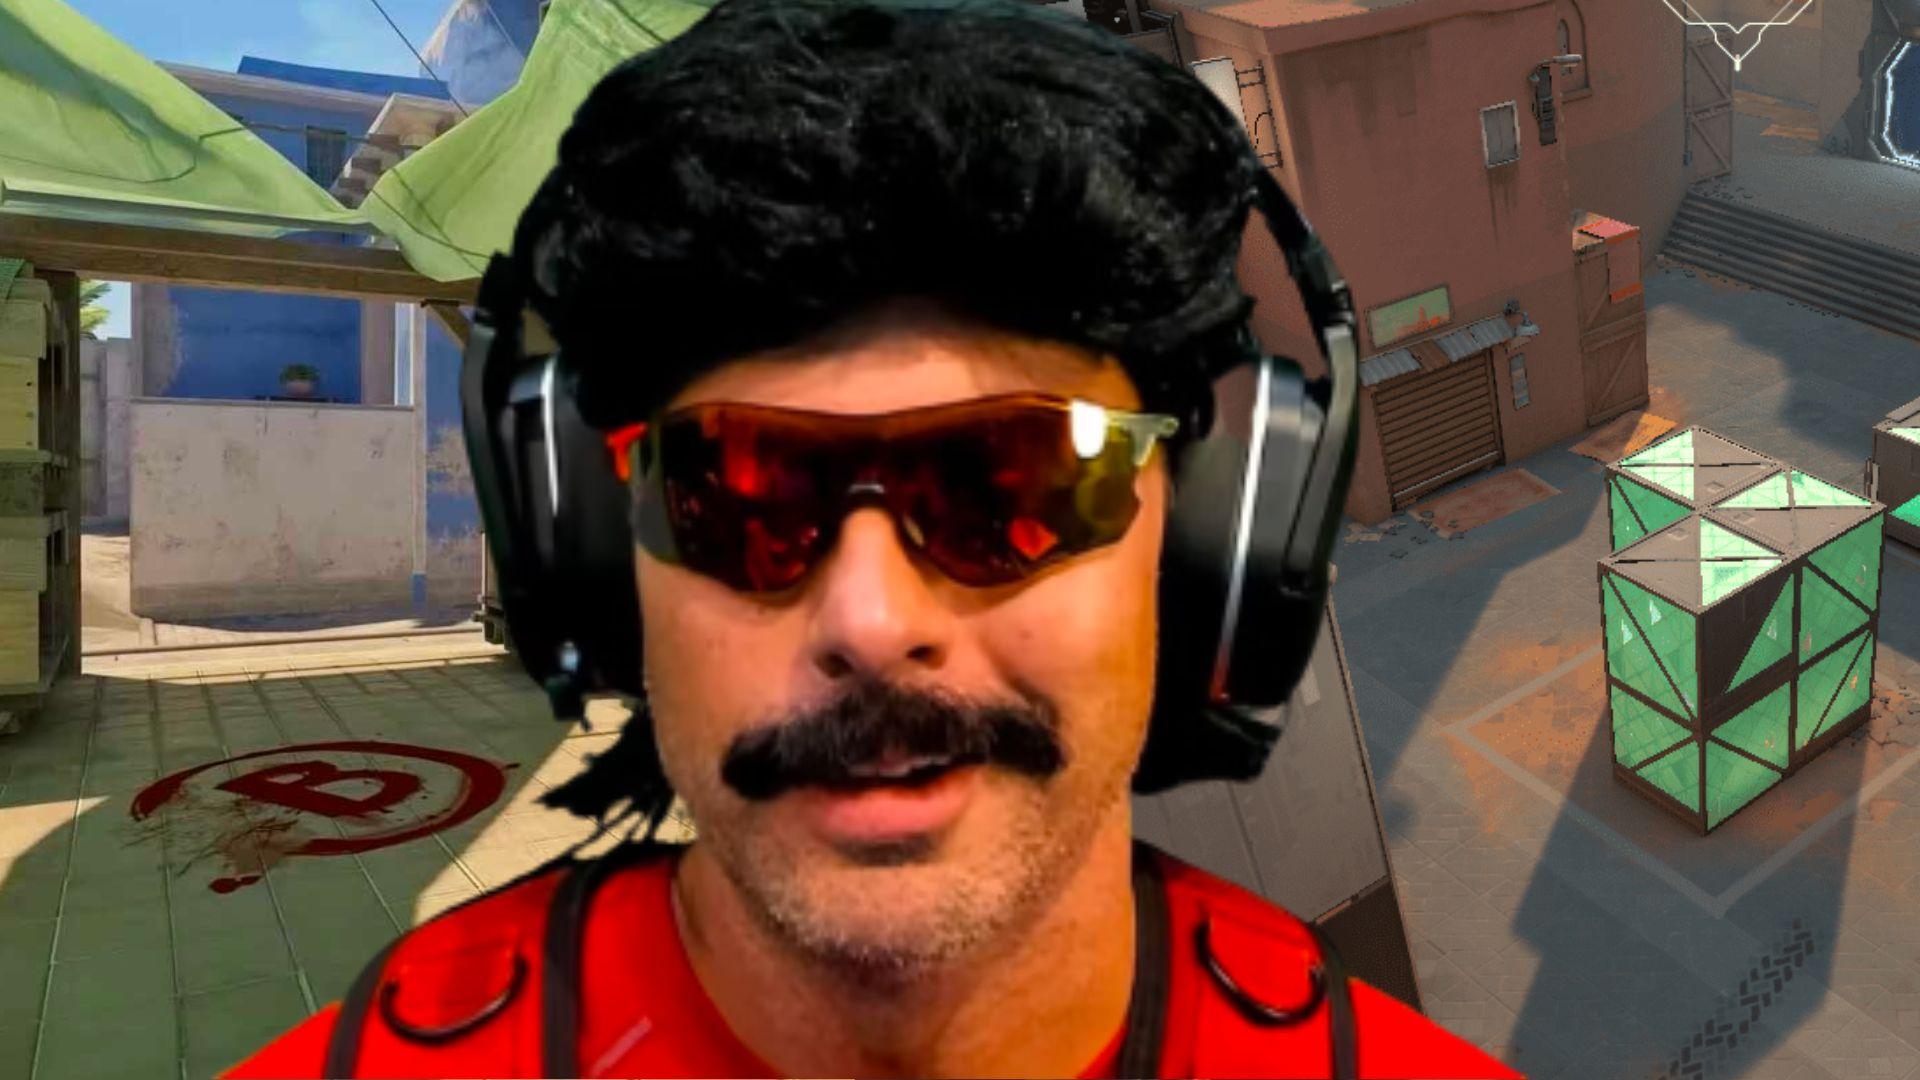 Dr Disrespect sat in front of Mirage and Fracture from CS2 and Valorant